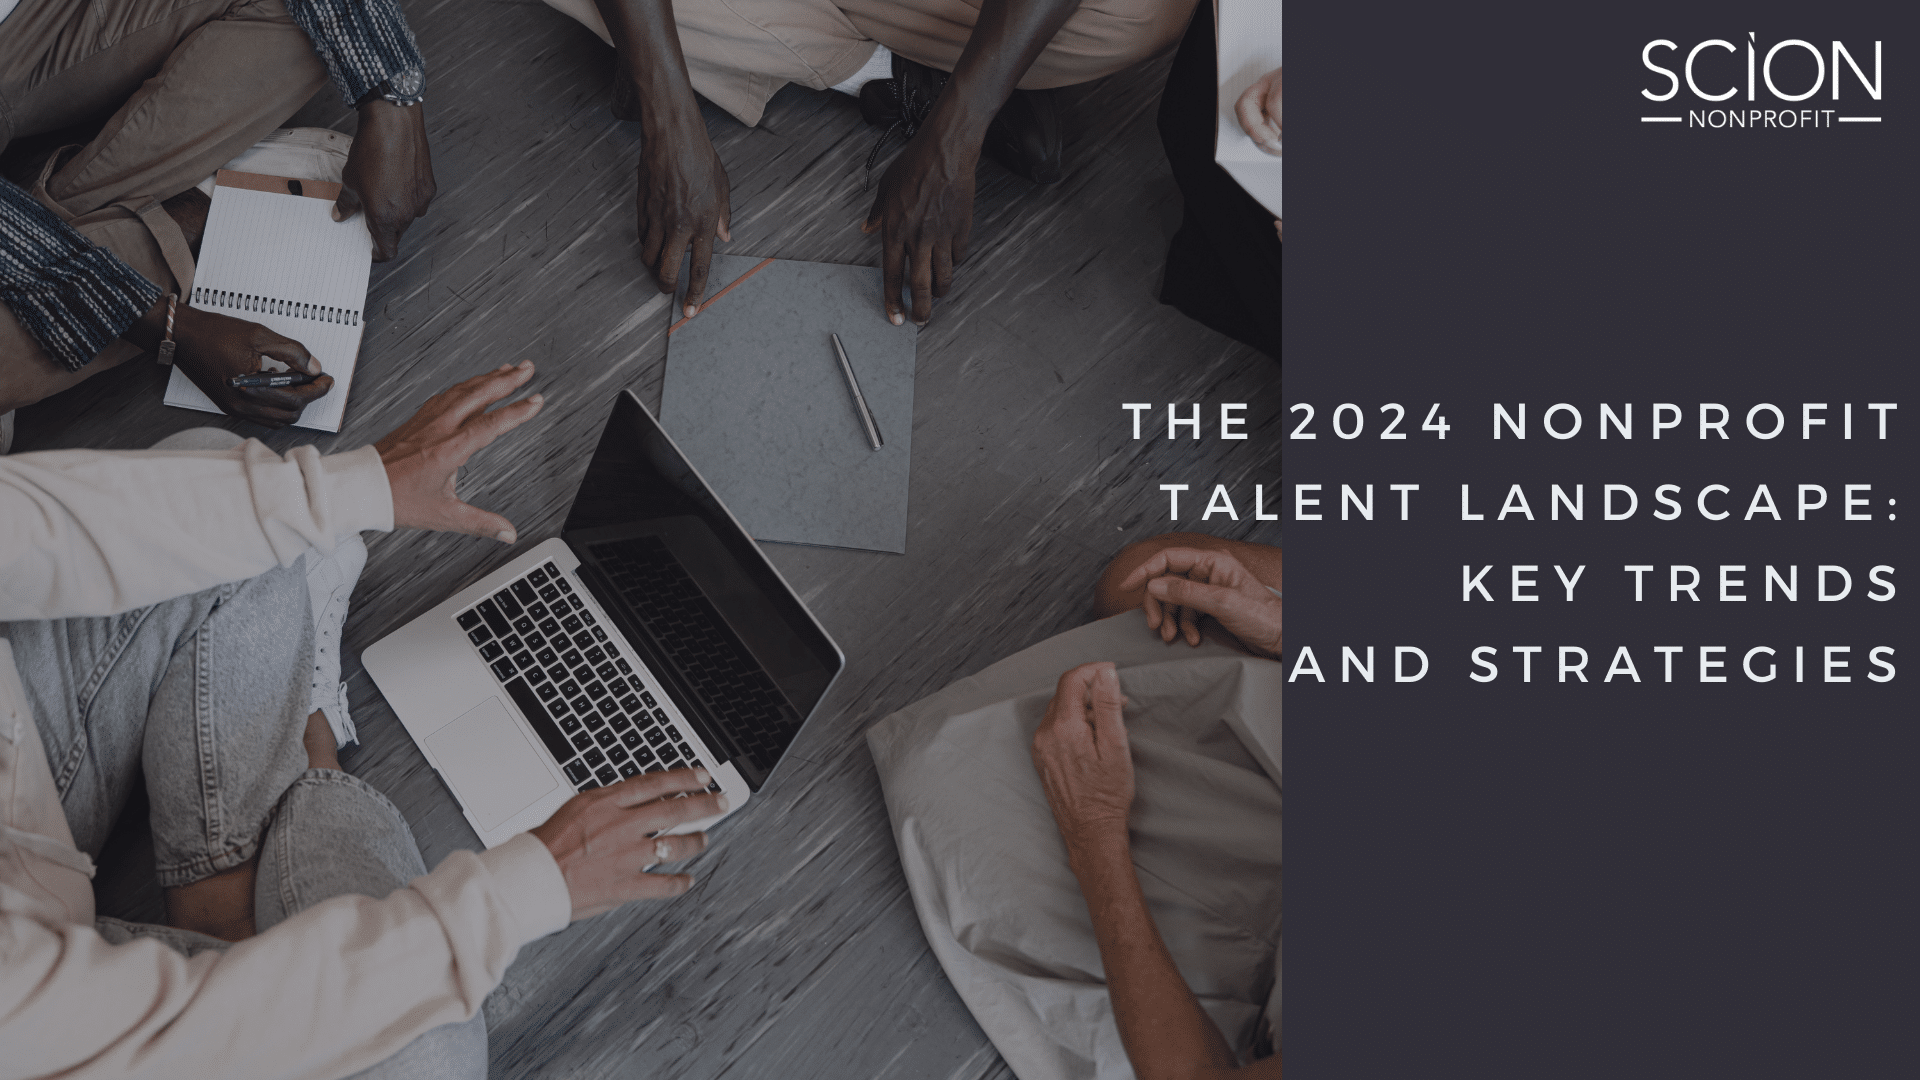 The 2024 Nonprofit Talent Landscape Key Trends and Strategies